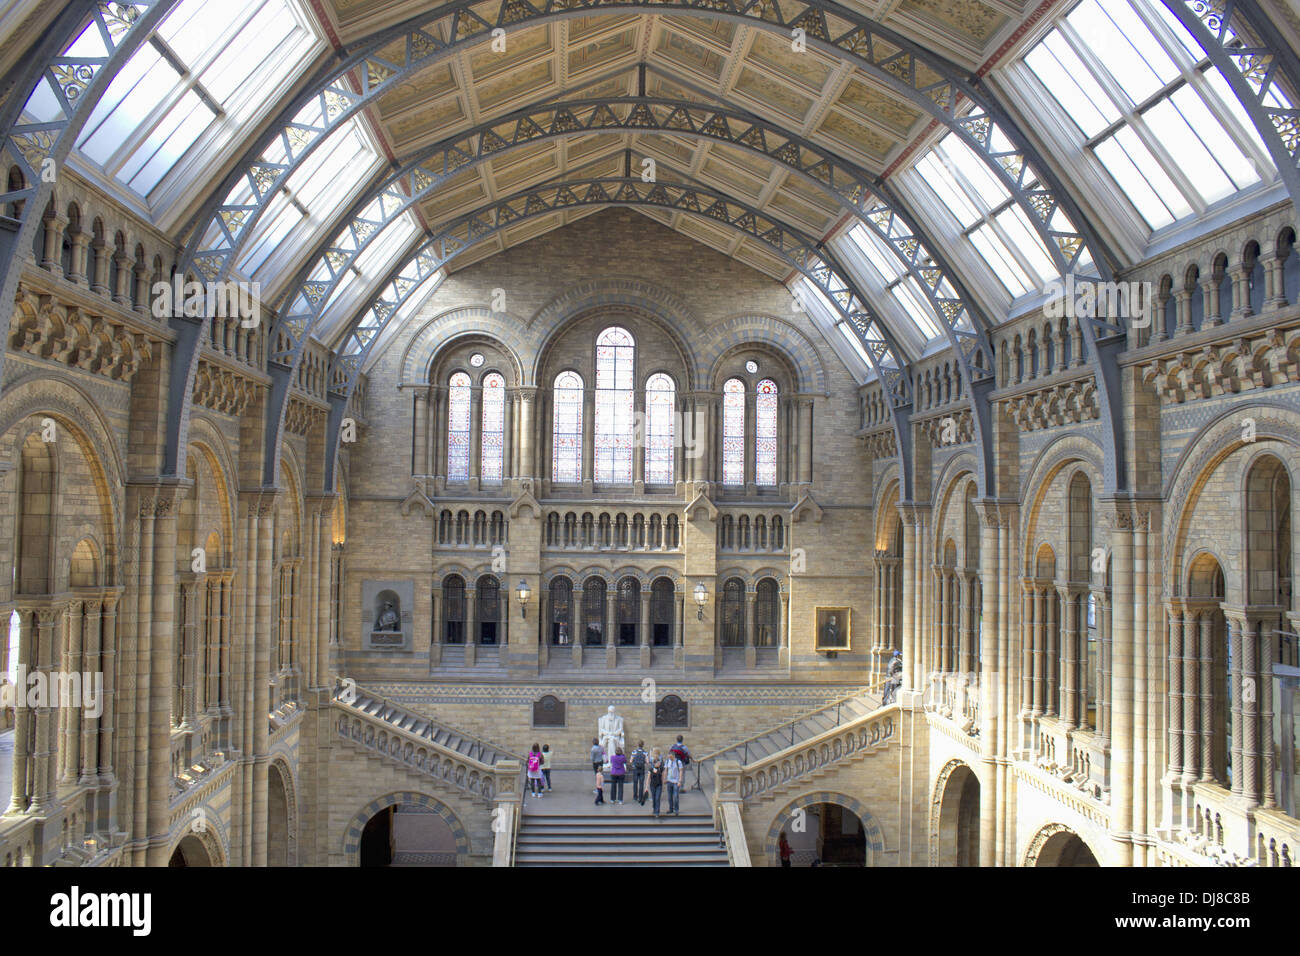 Central hall of the Natural History Museum, London, England Stock Photo